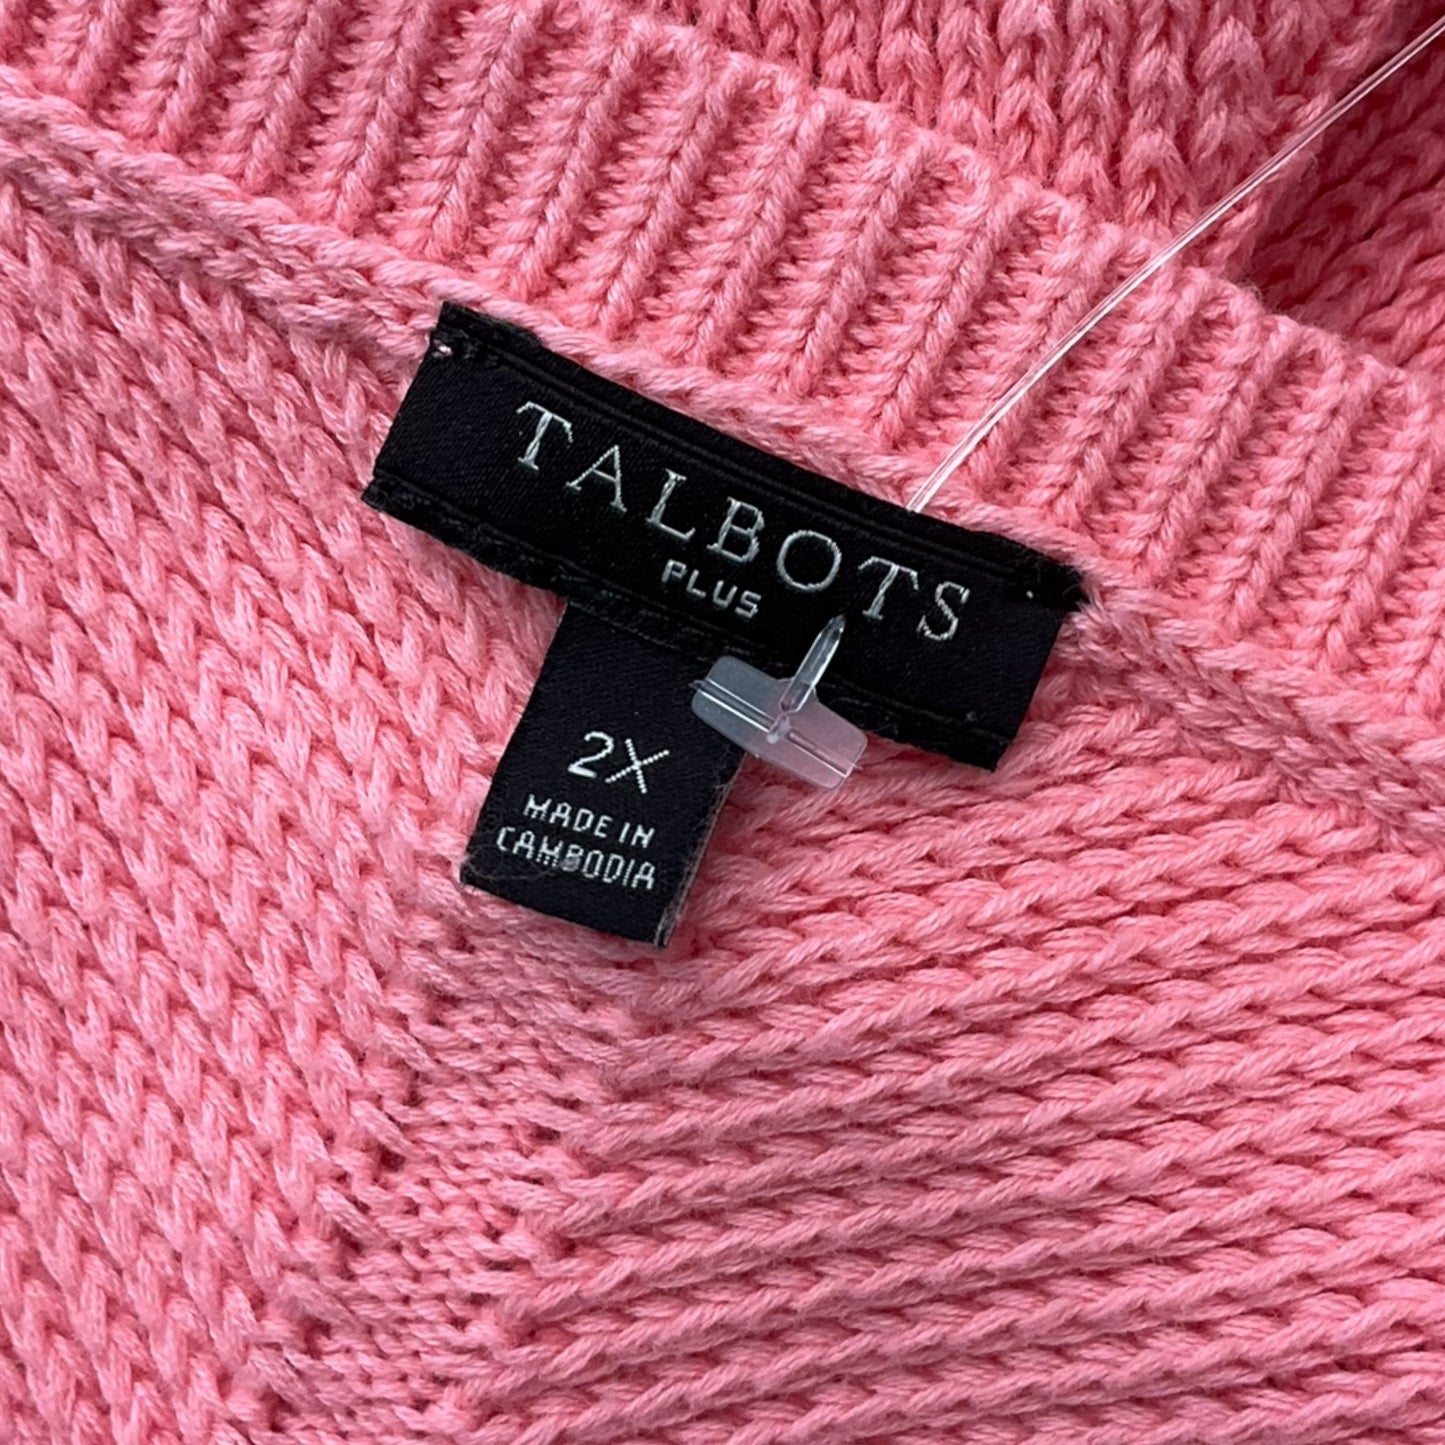 Sweater By Talbots O  Size: 2x